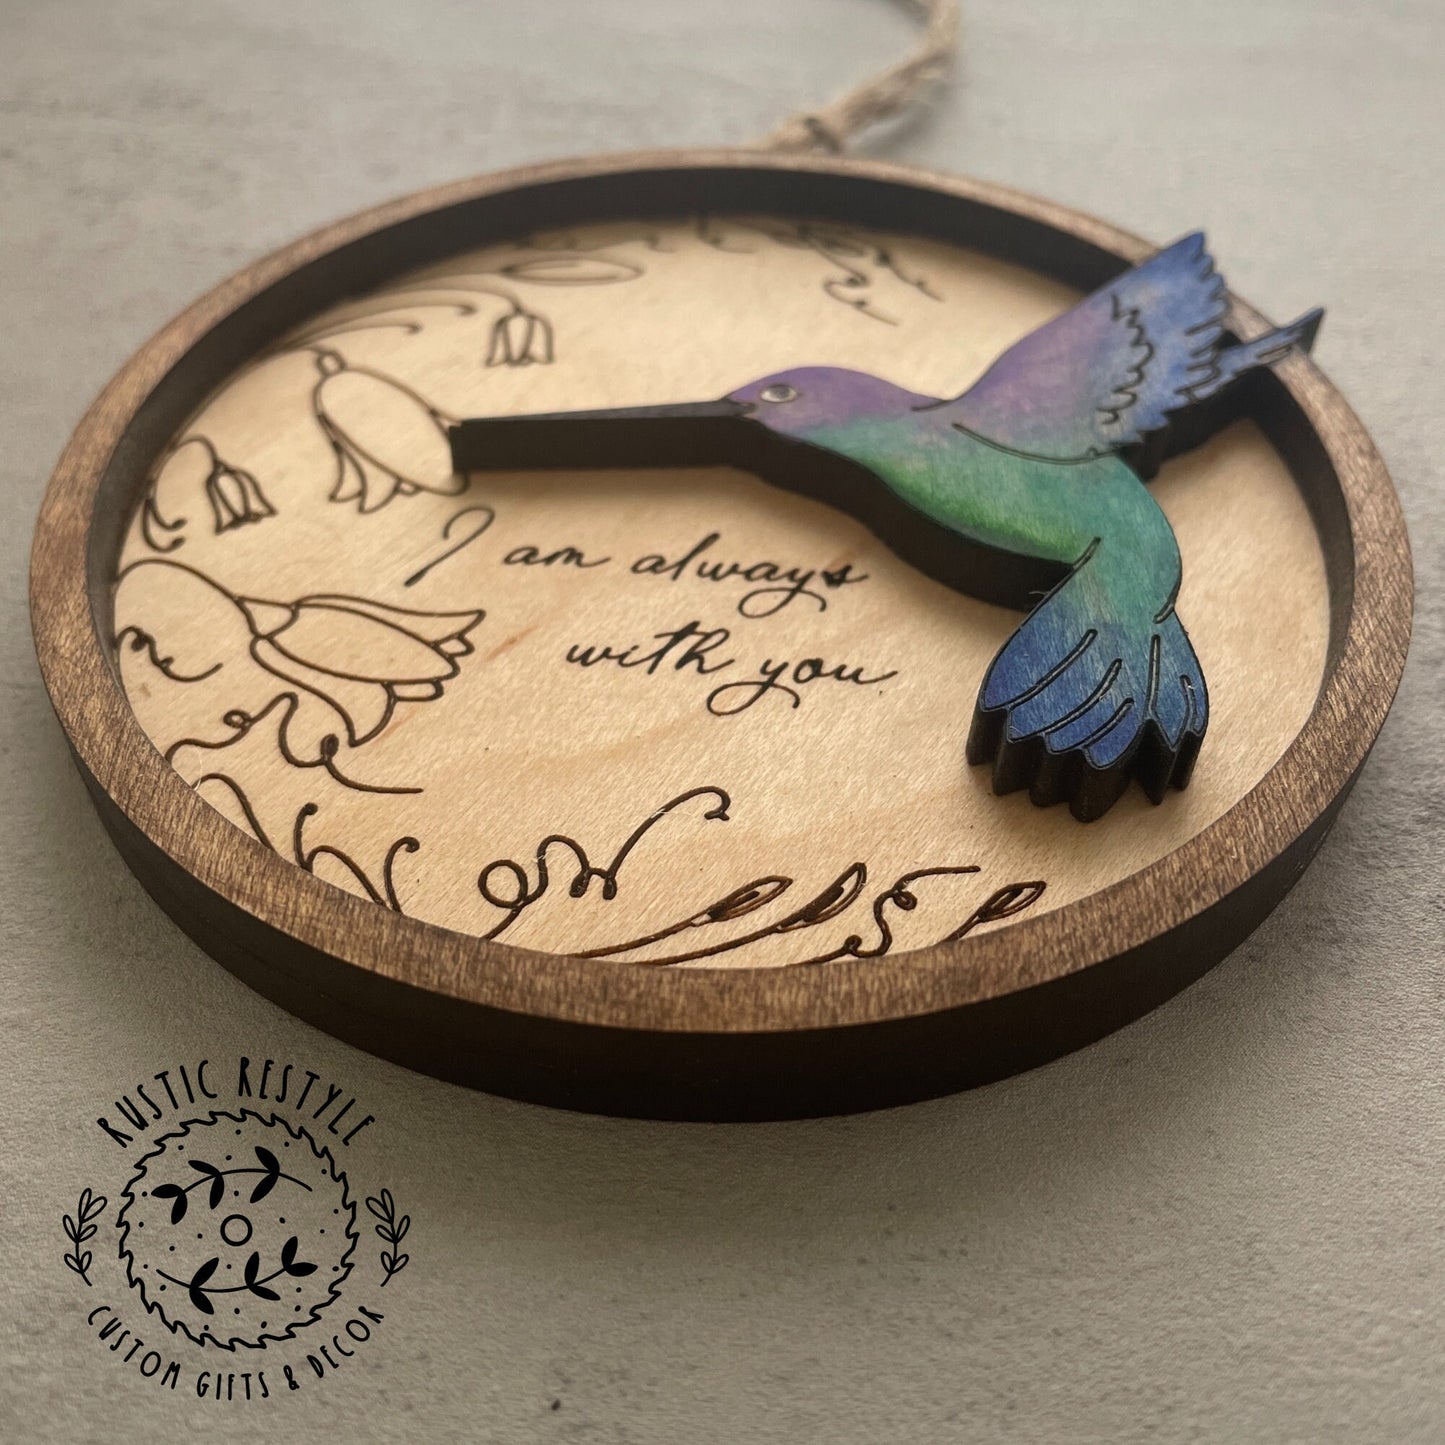 Memorial Hummingbird Remembrance ornament, 4 inch handpainted hummingbird Ornament can be personalized with an engraved name on the back